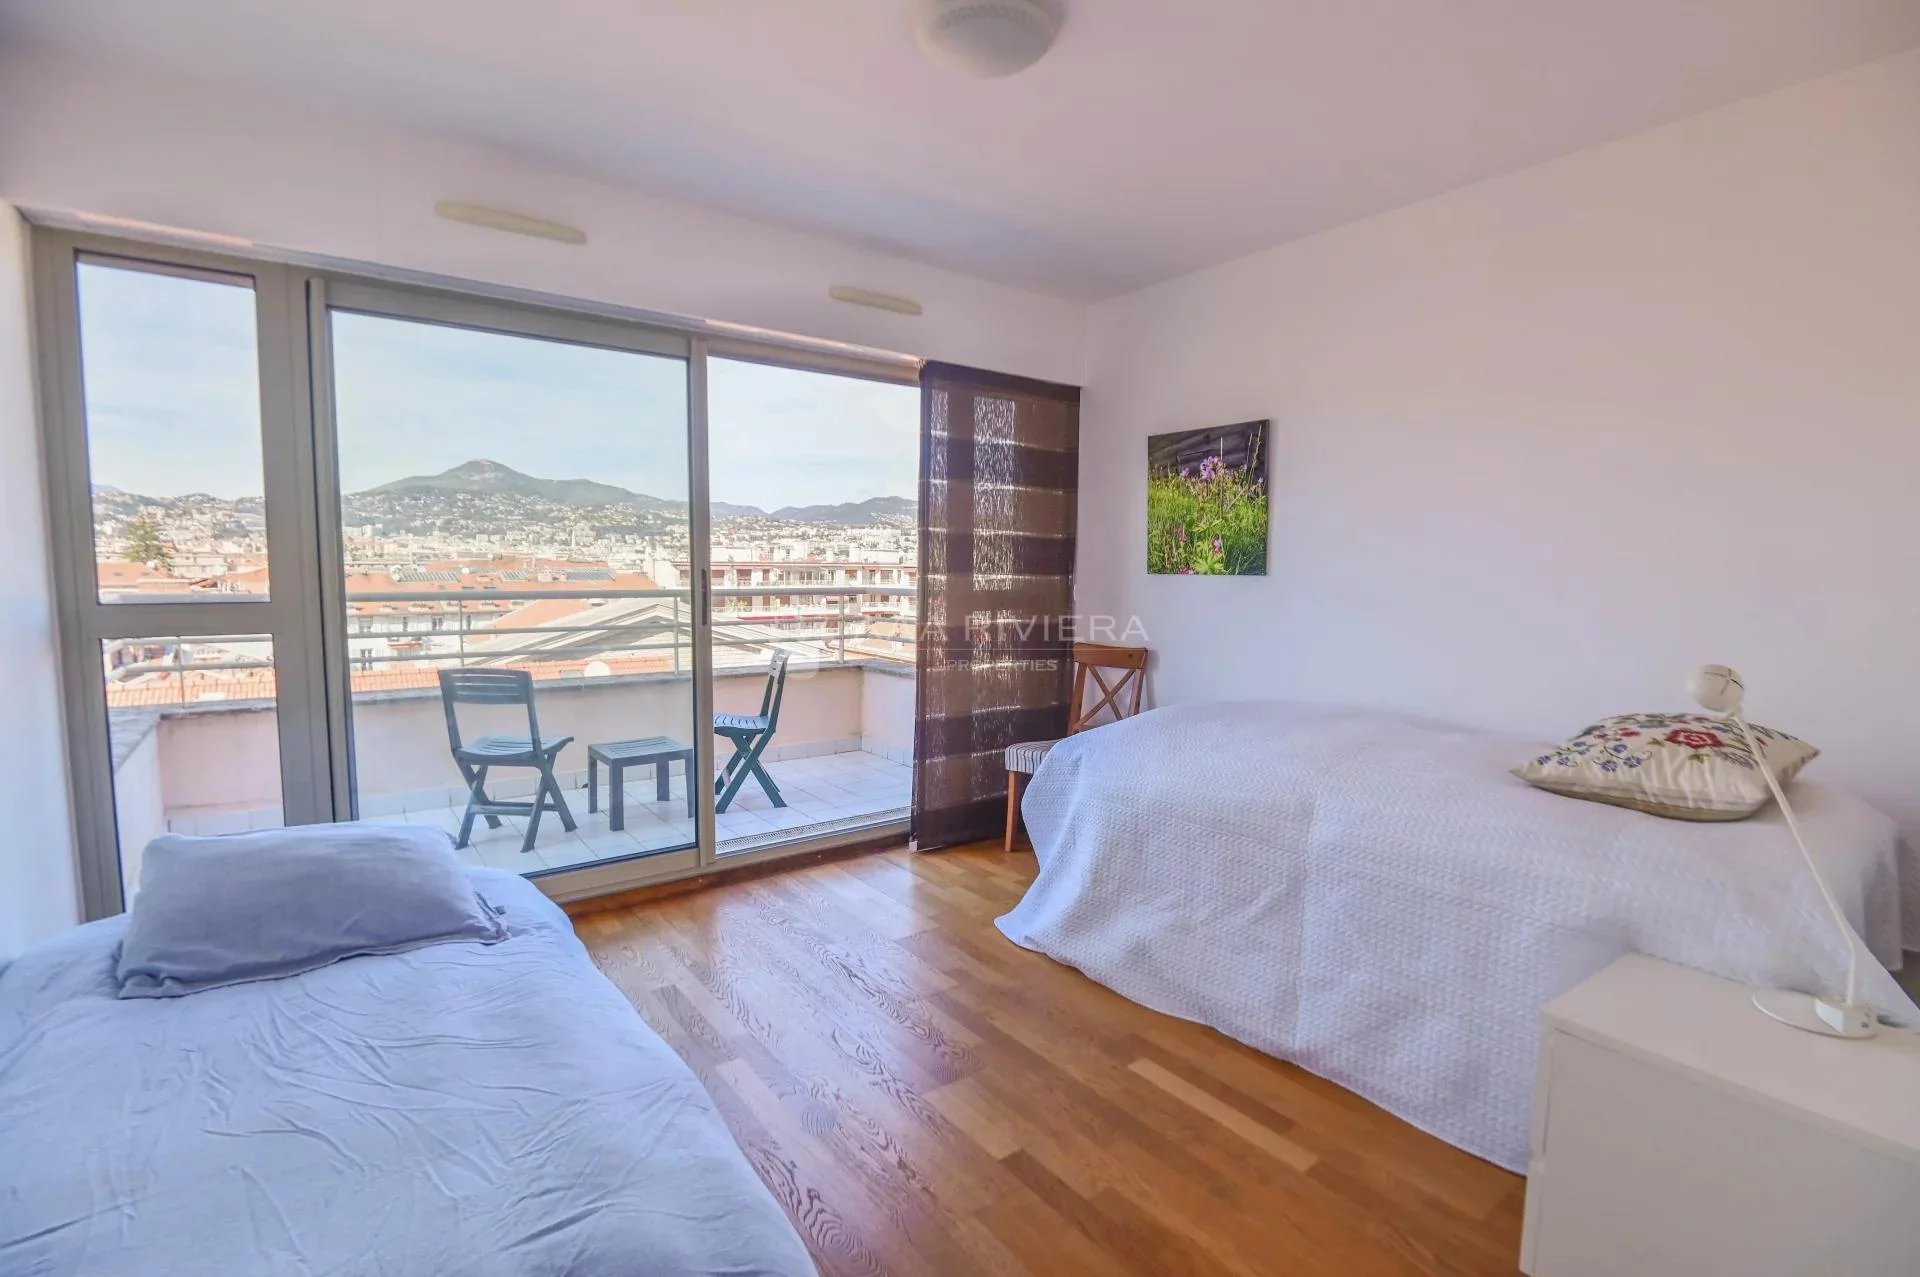 SOLD - SOLE AGENT  - Nice Carré d'Or - Bright 3 room top floor apt with terraces and panoramic view